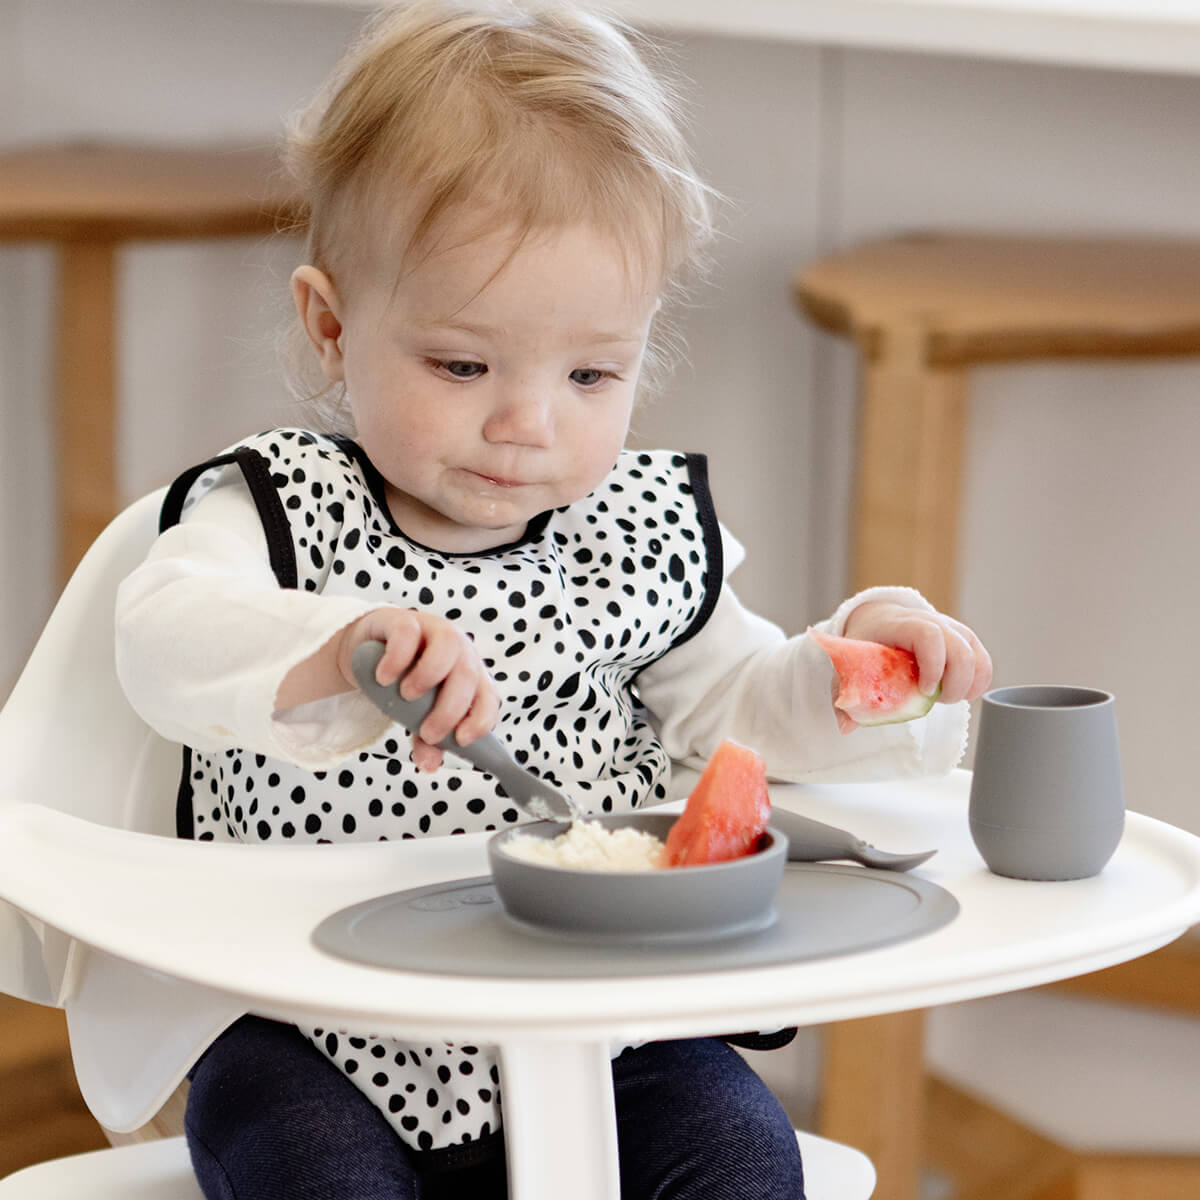 First Foods Set in Gray by ezpz / The Original All-In-One Silicone Plates & Placemats that Stick to the Table